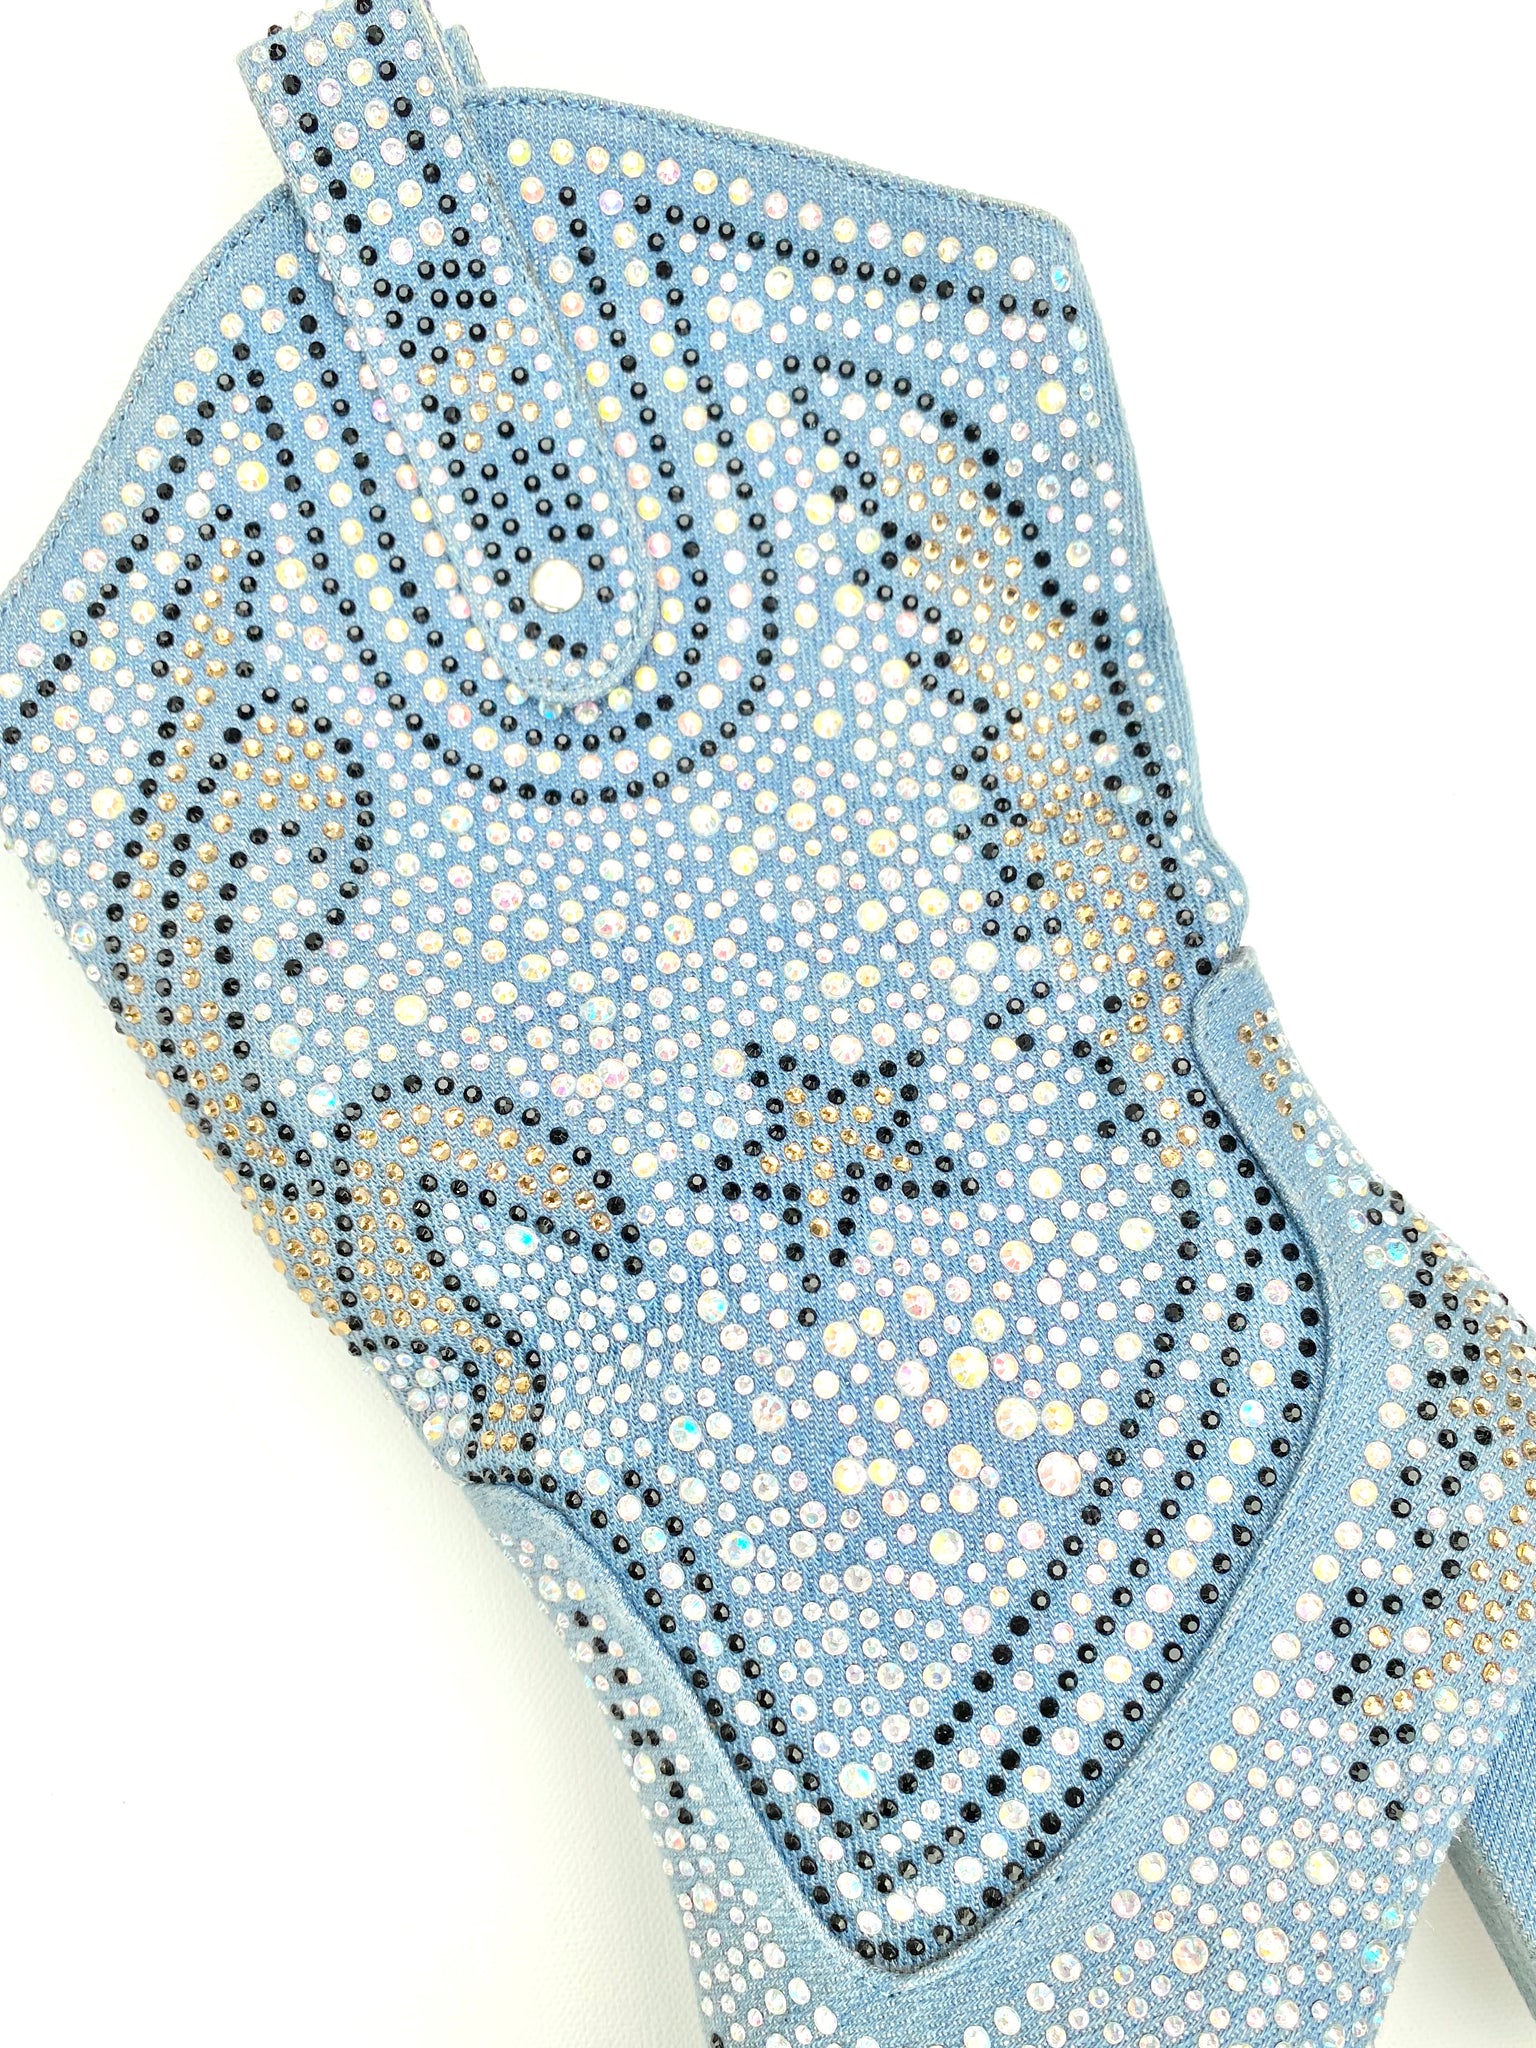 VINTAGE: Western Boots - Bedazzled Blue